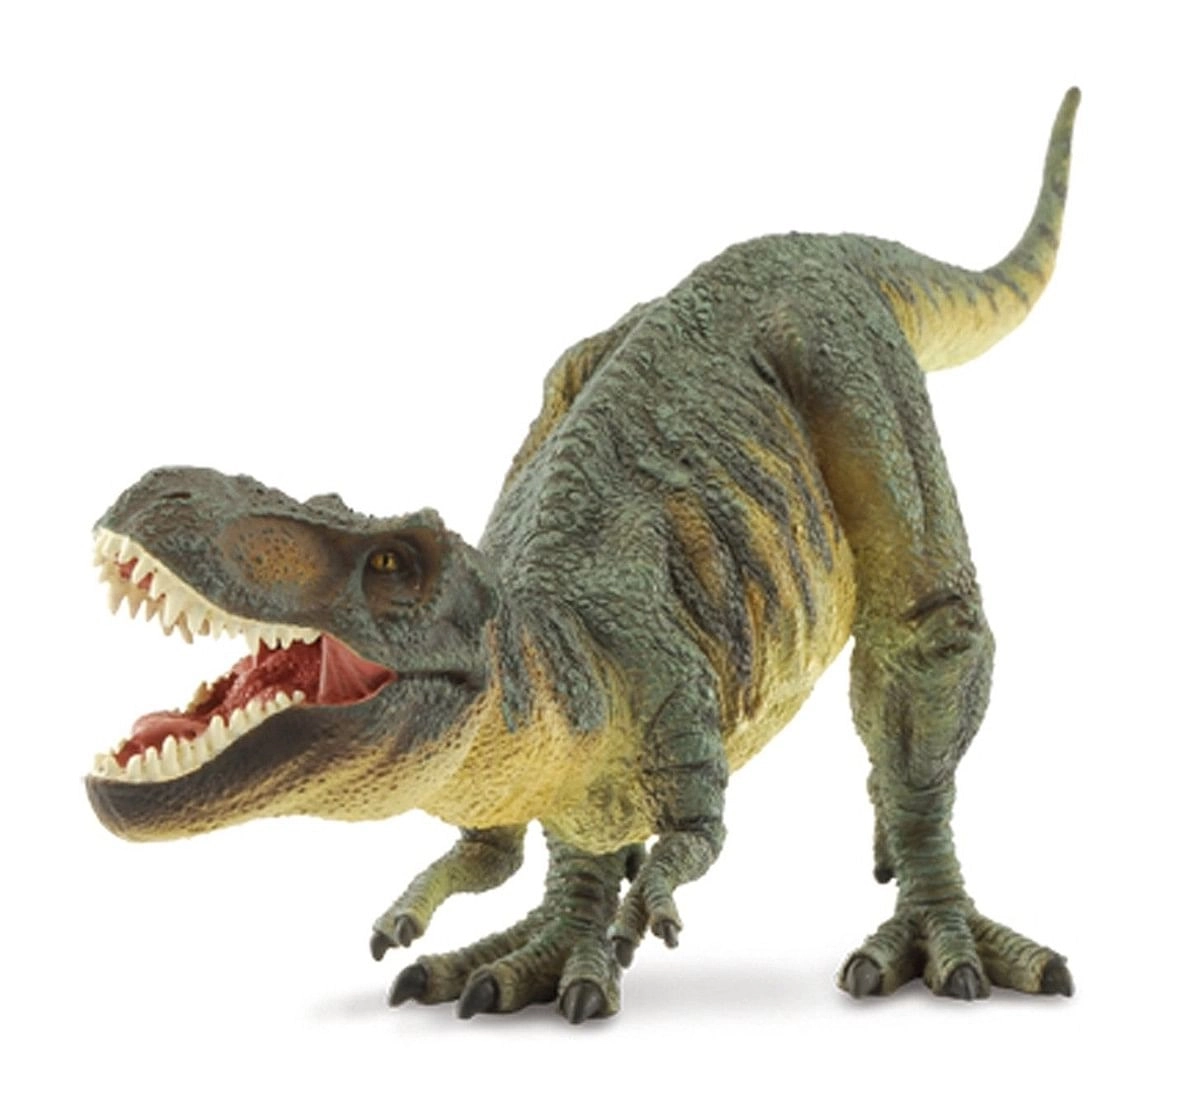 Collecta Tyrannosaurus Rex Toy (1:40 Scale) Animal Figure for Kids age 3Y+ (Green)